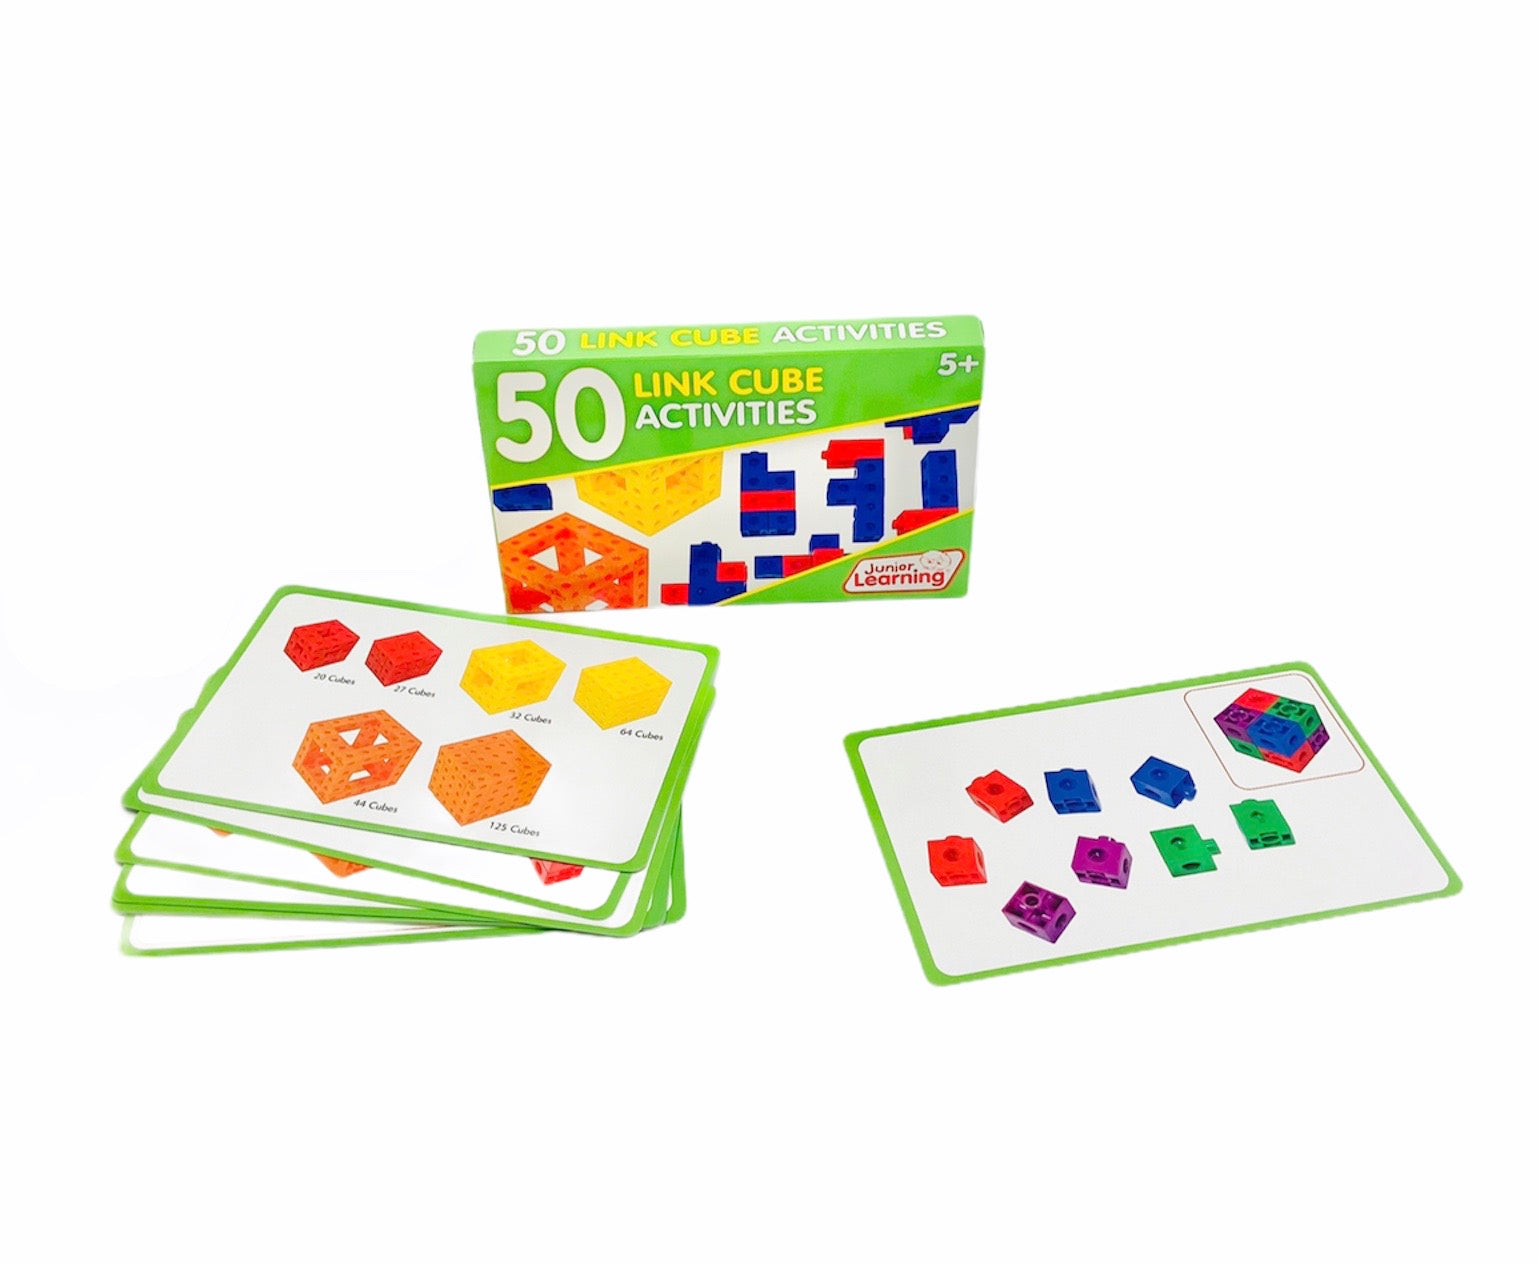 50 Link Cube Activities Cards laid out in front of packaging with white background